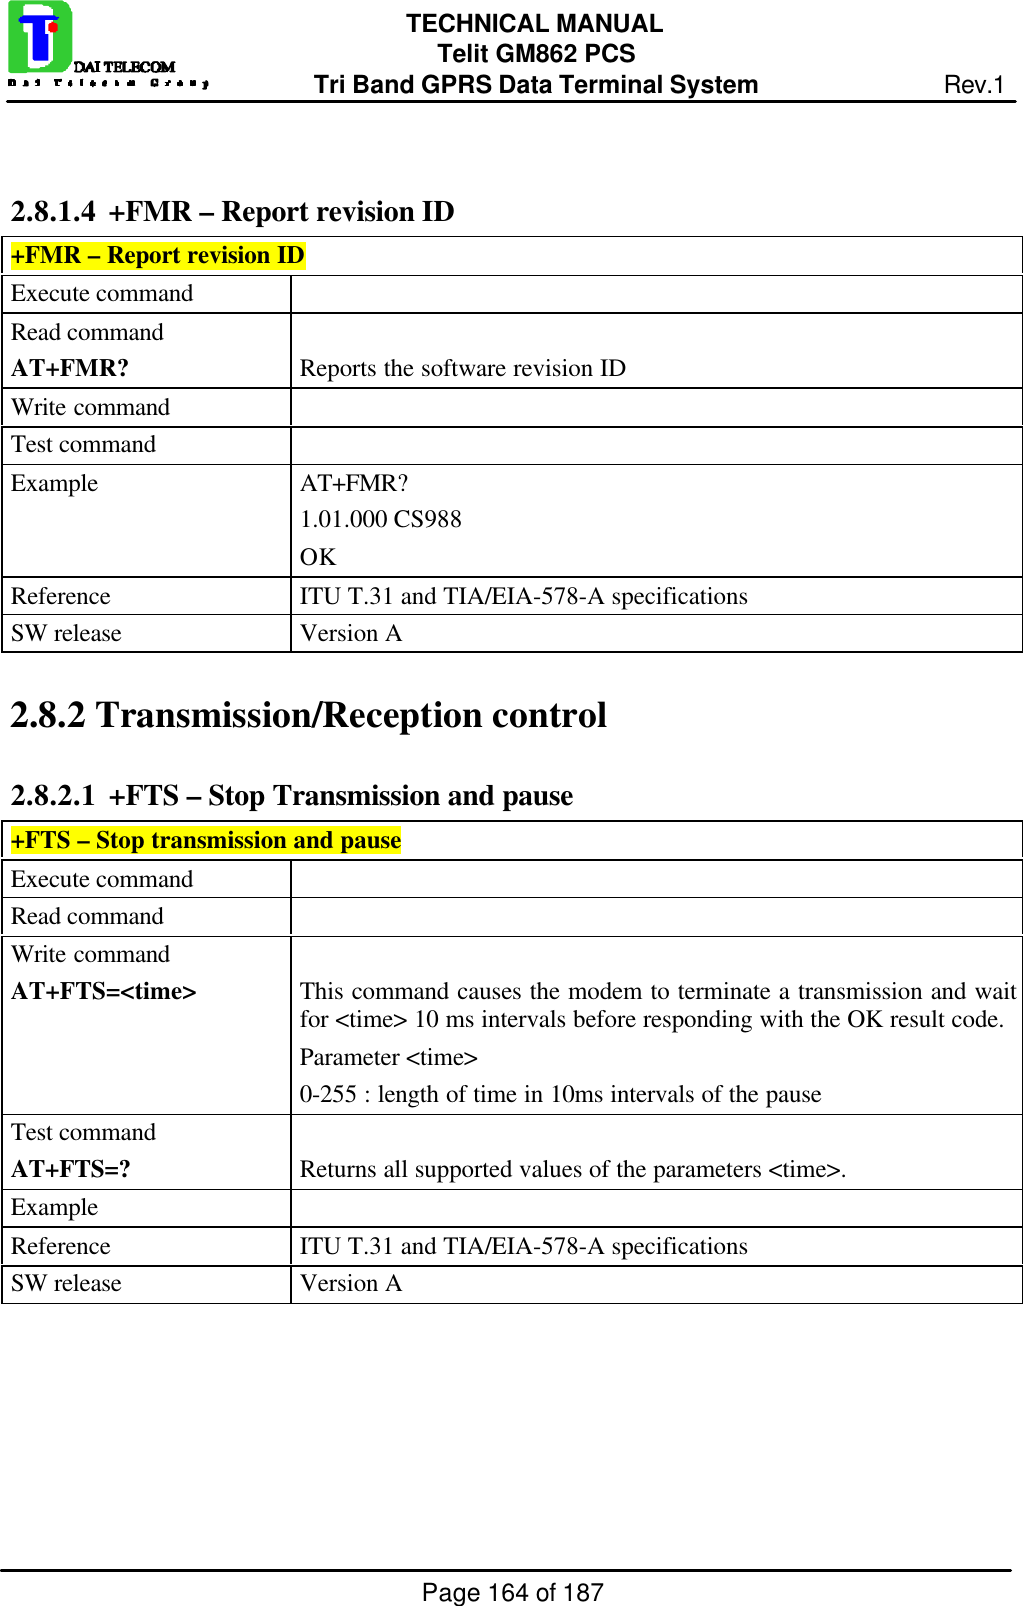 Page 164 of 187TECHNICAL MANUALTelit GM862 PCSTri Band GPRS Data Terminal System Rev.12.8.1.4  +FMR – Report revision ID+FMR – Report revision IDExecute commandRead commandAT+FMR? Reports the software revision IDWrite commandTest commandExample AT+FMR?1.01.000 CS988OKReference ITU T.31 and TIA/EIA-578-A specificationsSW release Version A2.8.2  Transmission/Reception control2.8.2.1  +FTS – Stop Transmission and pause+FTS – Stop transmission and pauseExecute commandRead commandWrite commandAT+FTS=&lt;time&gt; This command causes the modem to terminate a transmission and waitfor &lt;time&gt; 10 ms intervals before responding with the OK result code.Parameter &lt;time&gt;0-255 : length of time in 10ms intervals of the pauseTest commandAT+FTS=? Returns all supported values of the parameters &lt;time&gt;.ExampleReference ITU T.31 and TIA/EIA-578-A specificationsSW release Version A